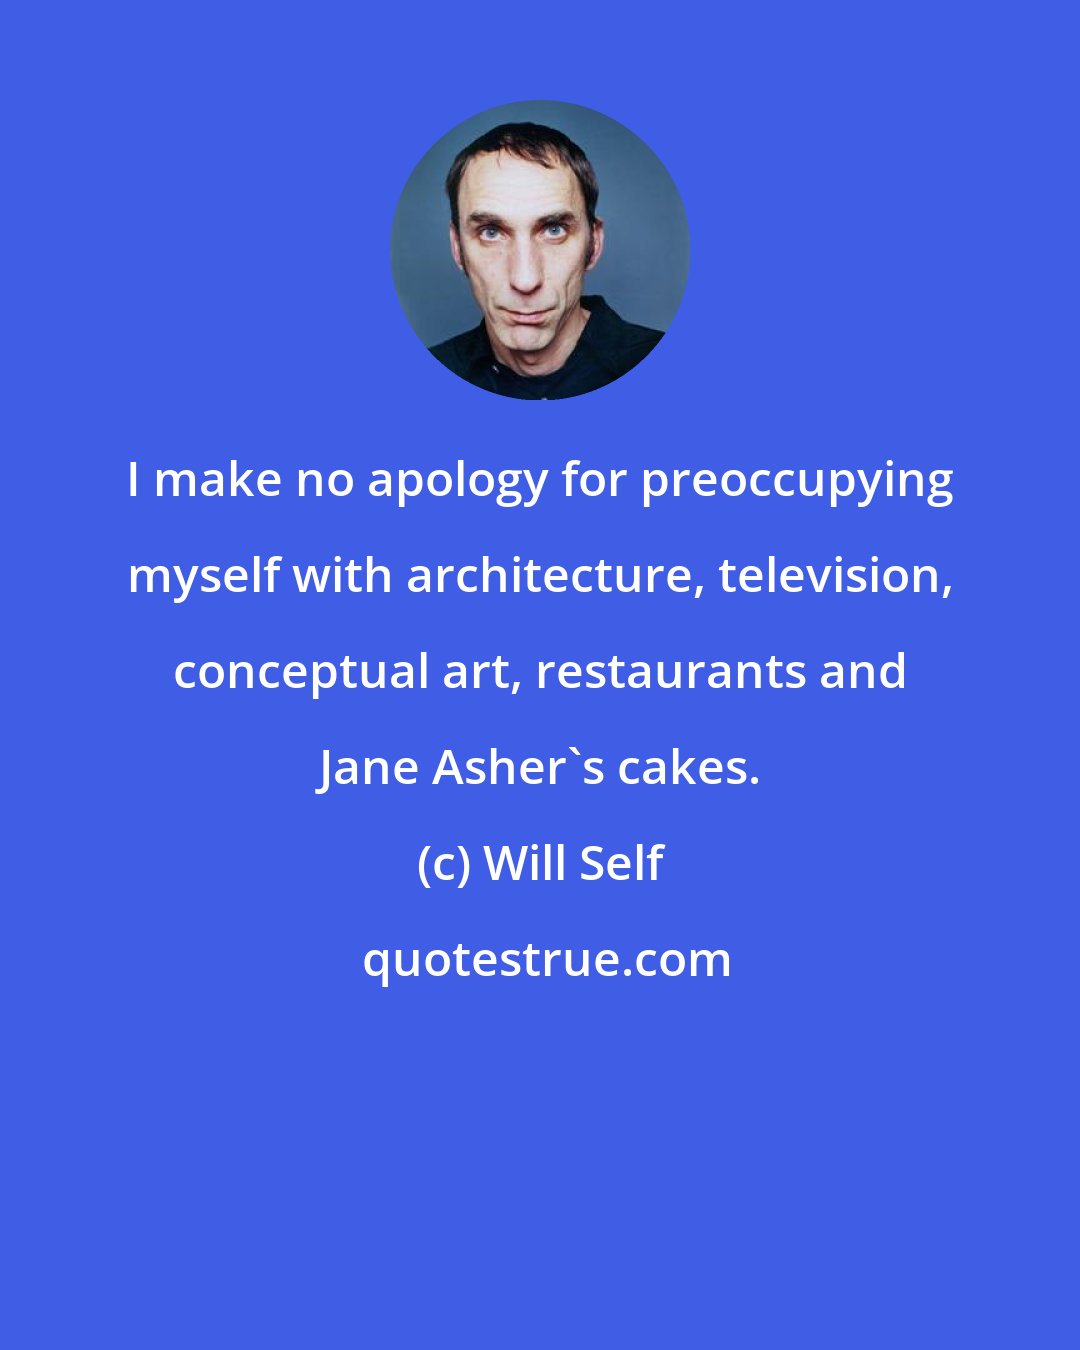 Will Self: I make no apology for preoccupying myself with architecture, television, conceptual art, restaurants and Jane Asher's cakes.